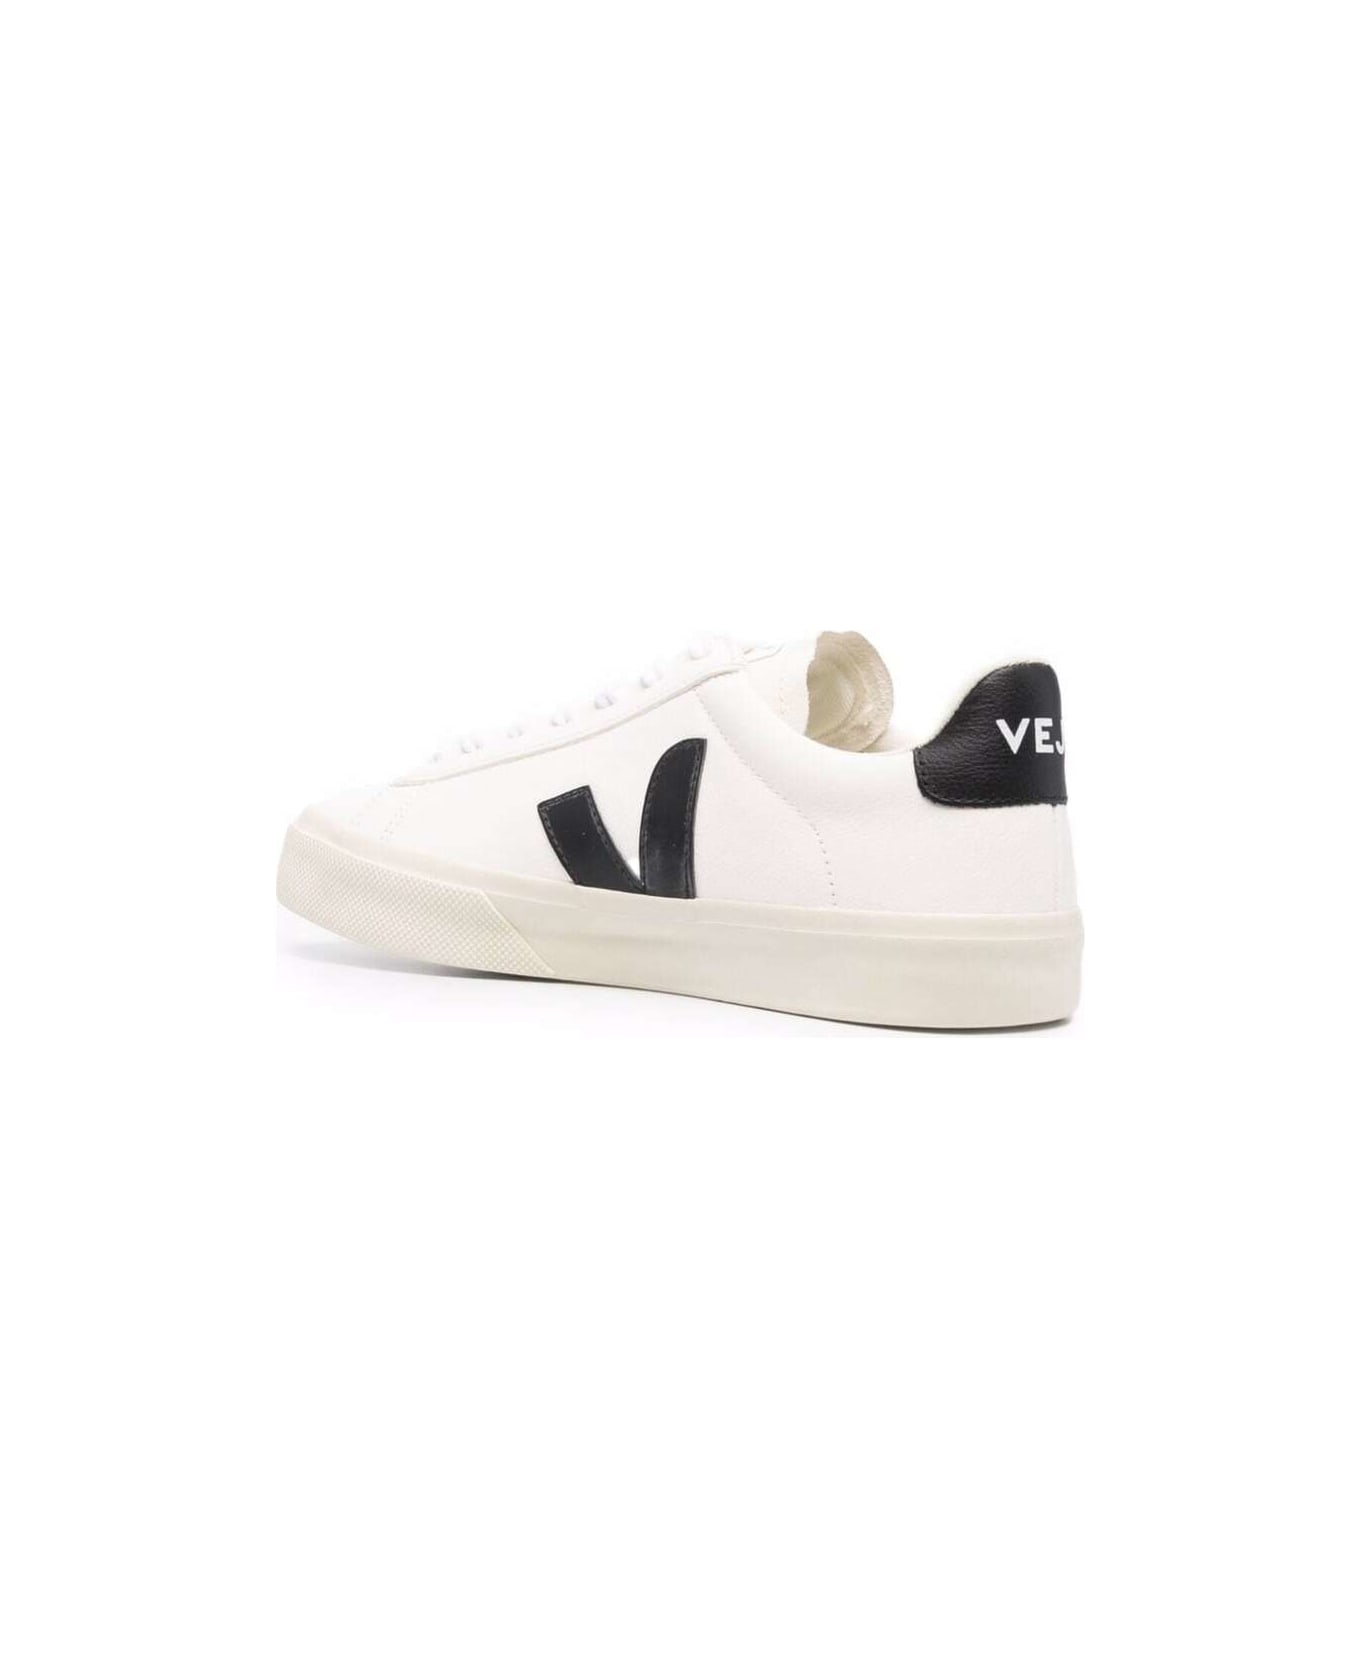 Veja Woman's Campo White And Black Vegan Leather Sneakers - Extra White Black